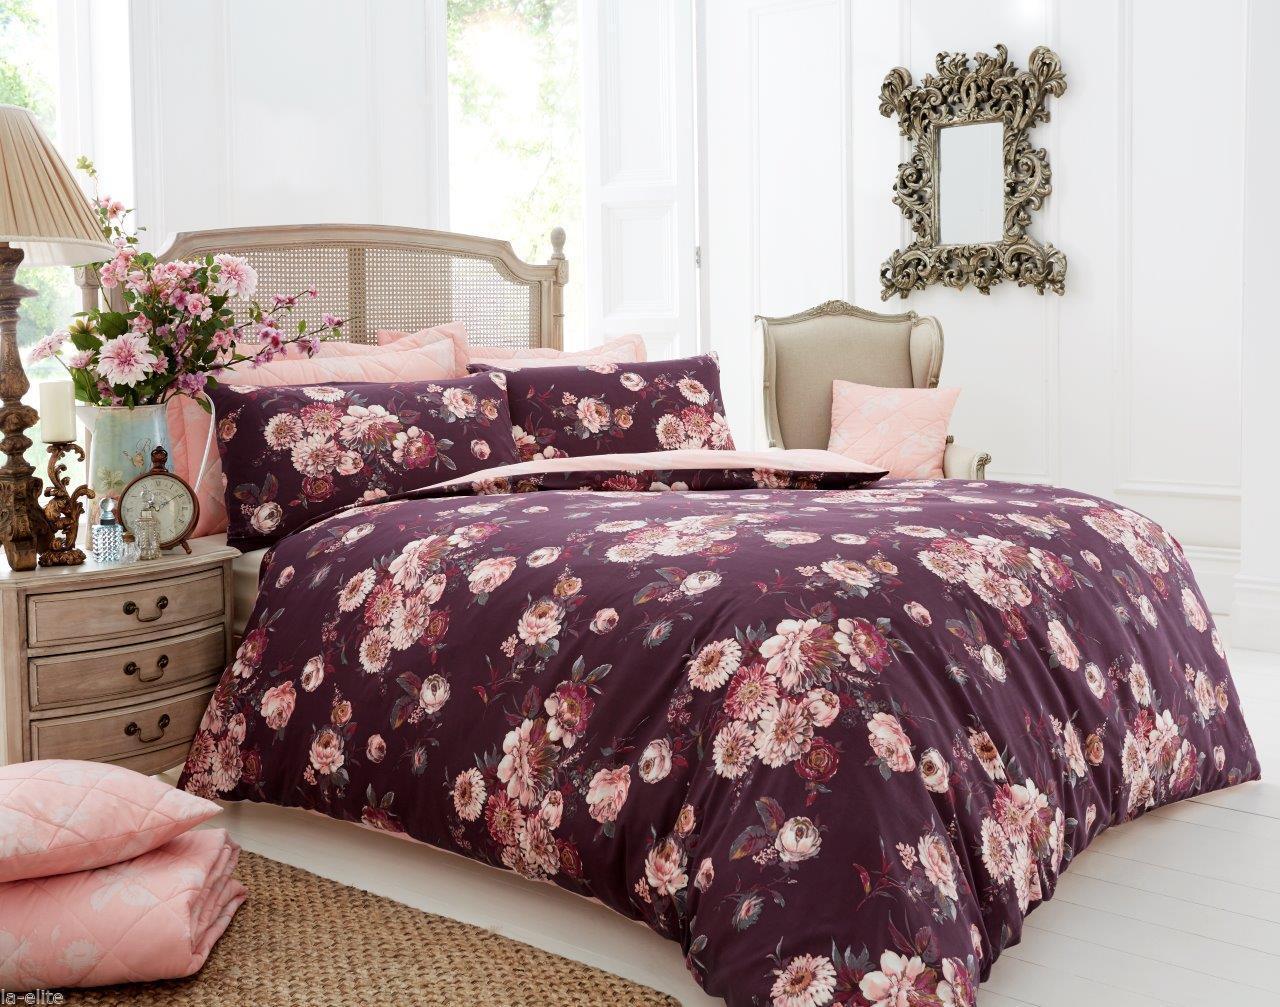 How About Buying A Cosy Silk Duvet Cover Delavish Co Uk